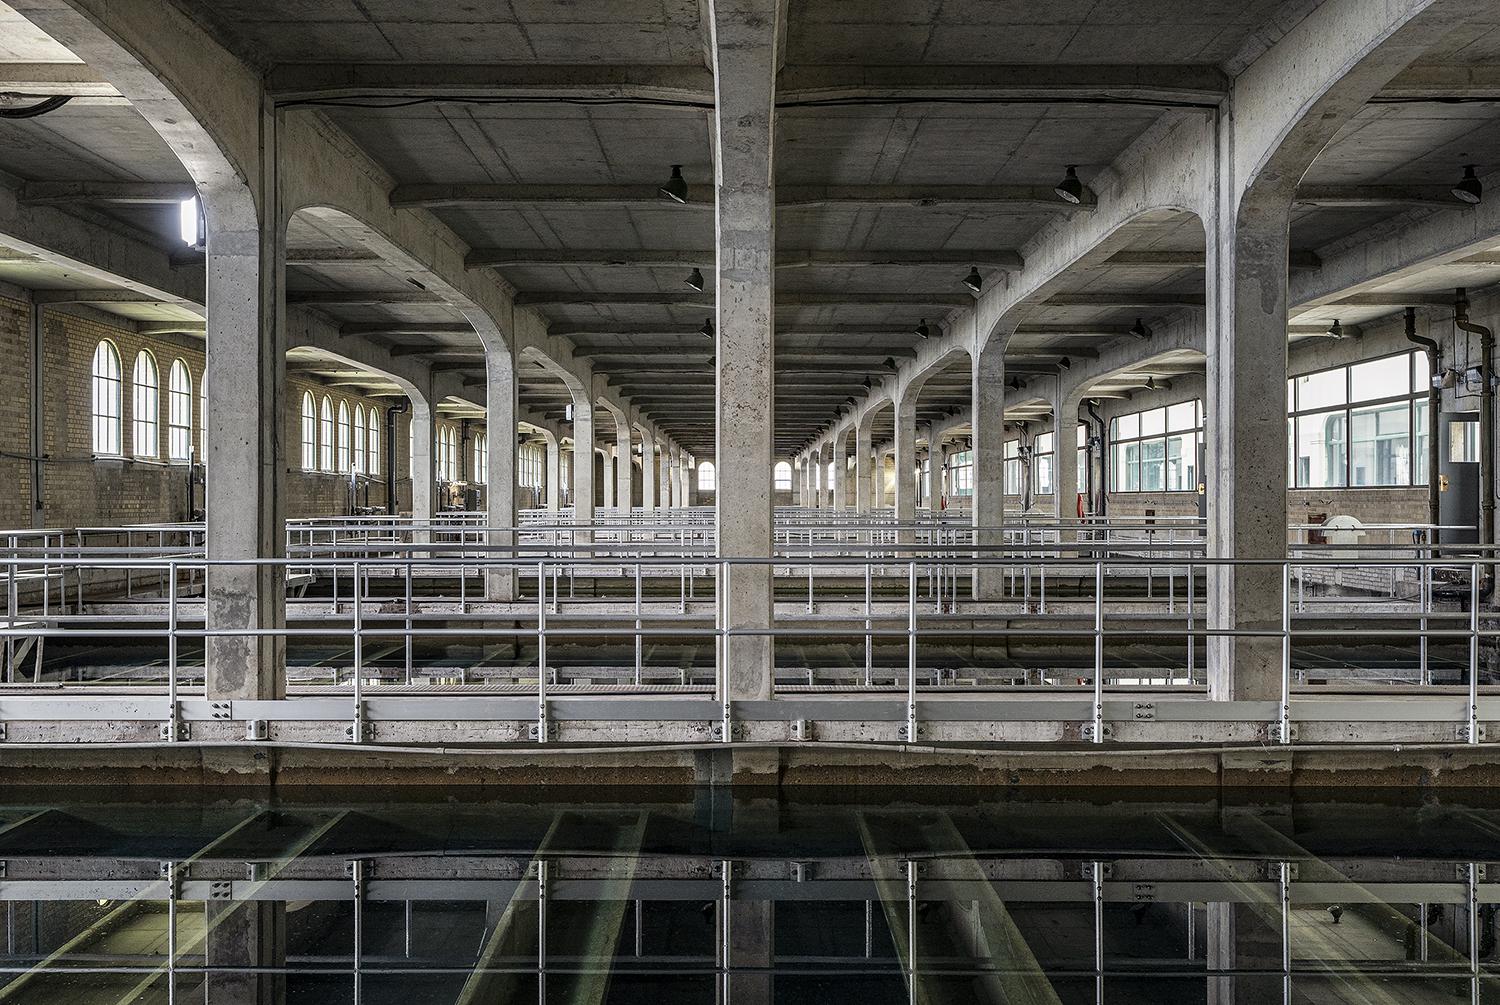 A view of the pools in a vast water treatment plant